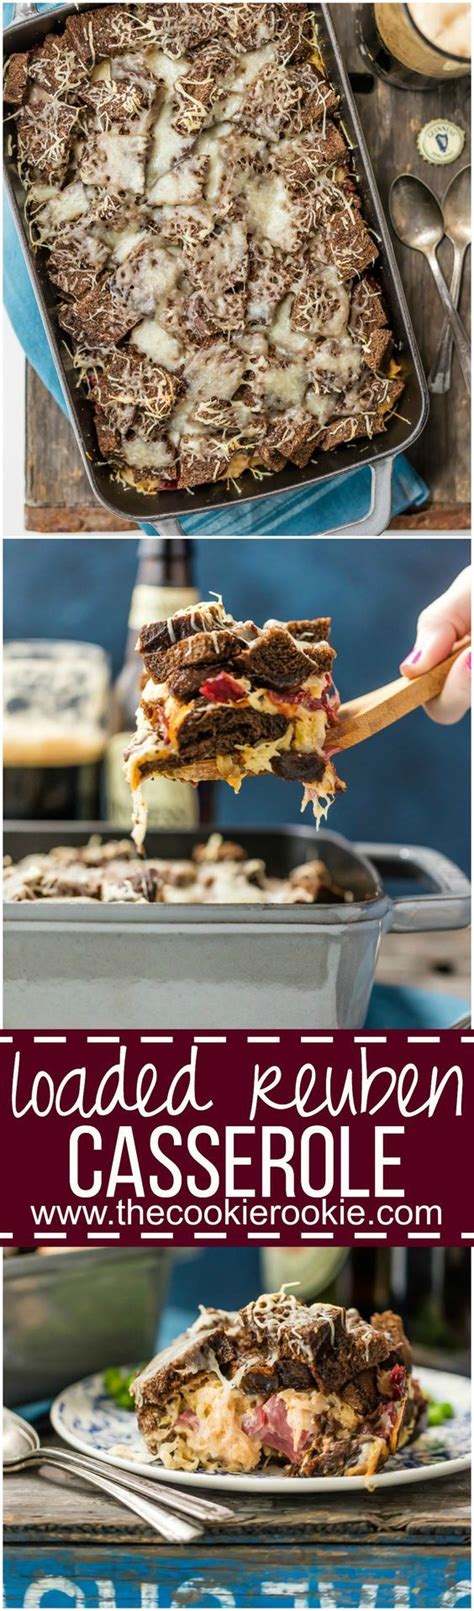 Just one bite and your luck will change for the better! We LOVE this Loaded Reuben Casserole every St. Patrick's Day! Such an easy comfort food recipe ...